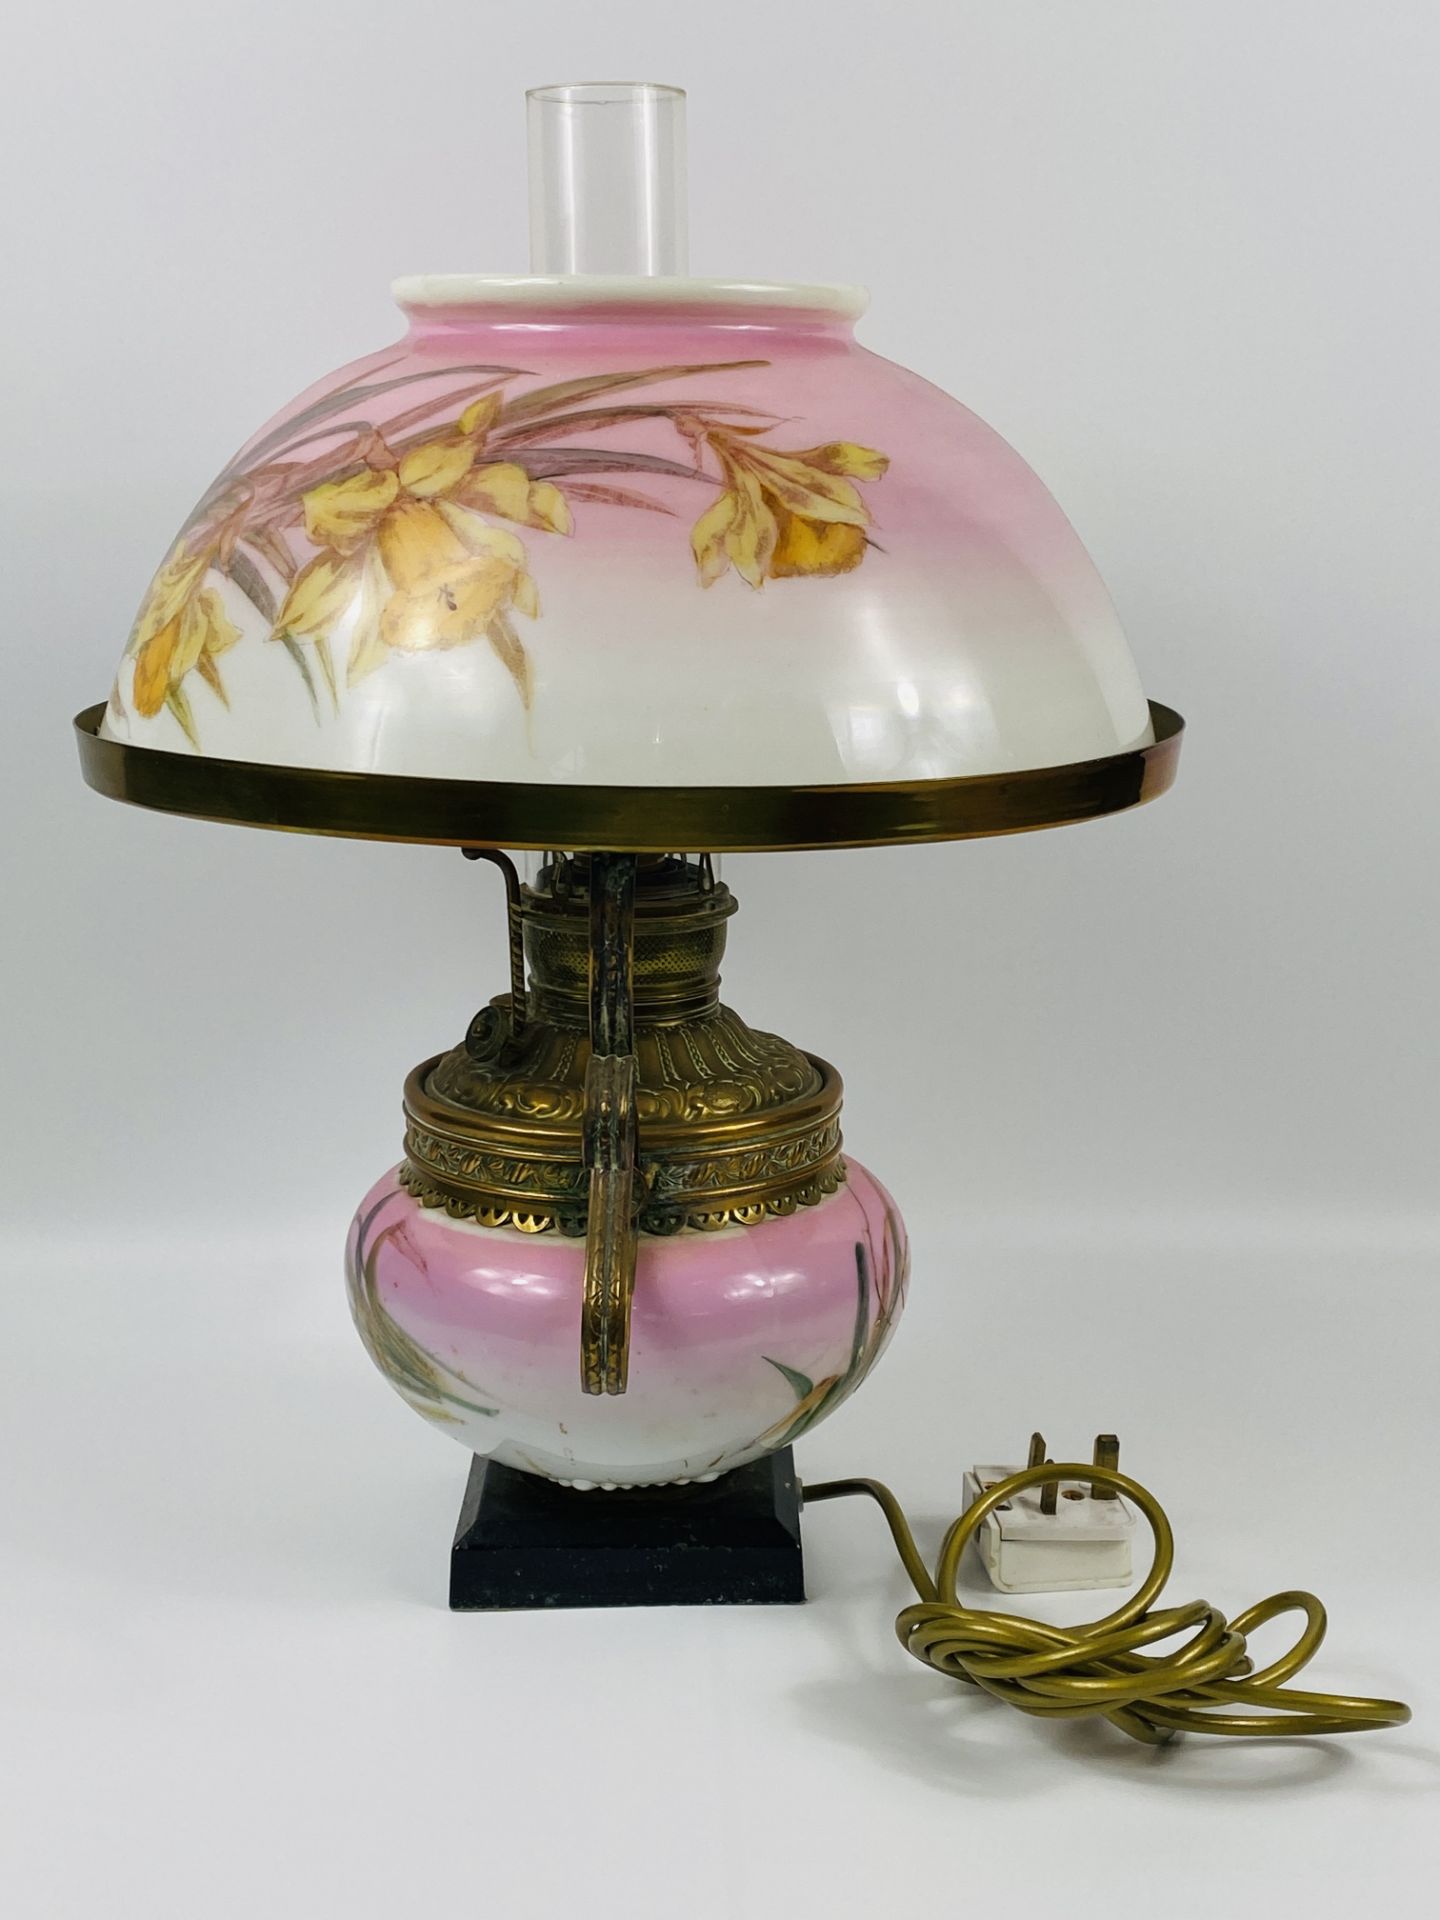 Victorian oil lamp later wired as a table lamp - Image 3 of 6